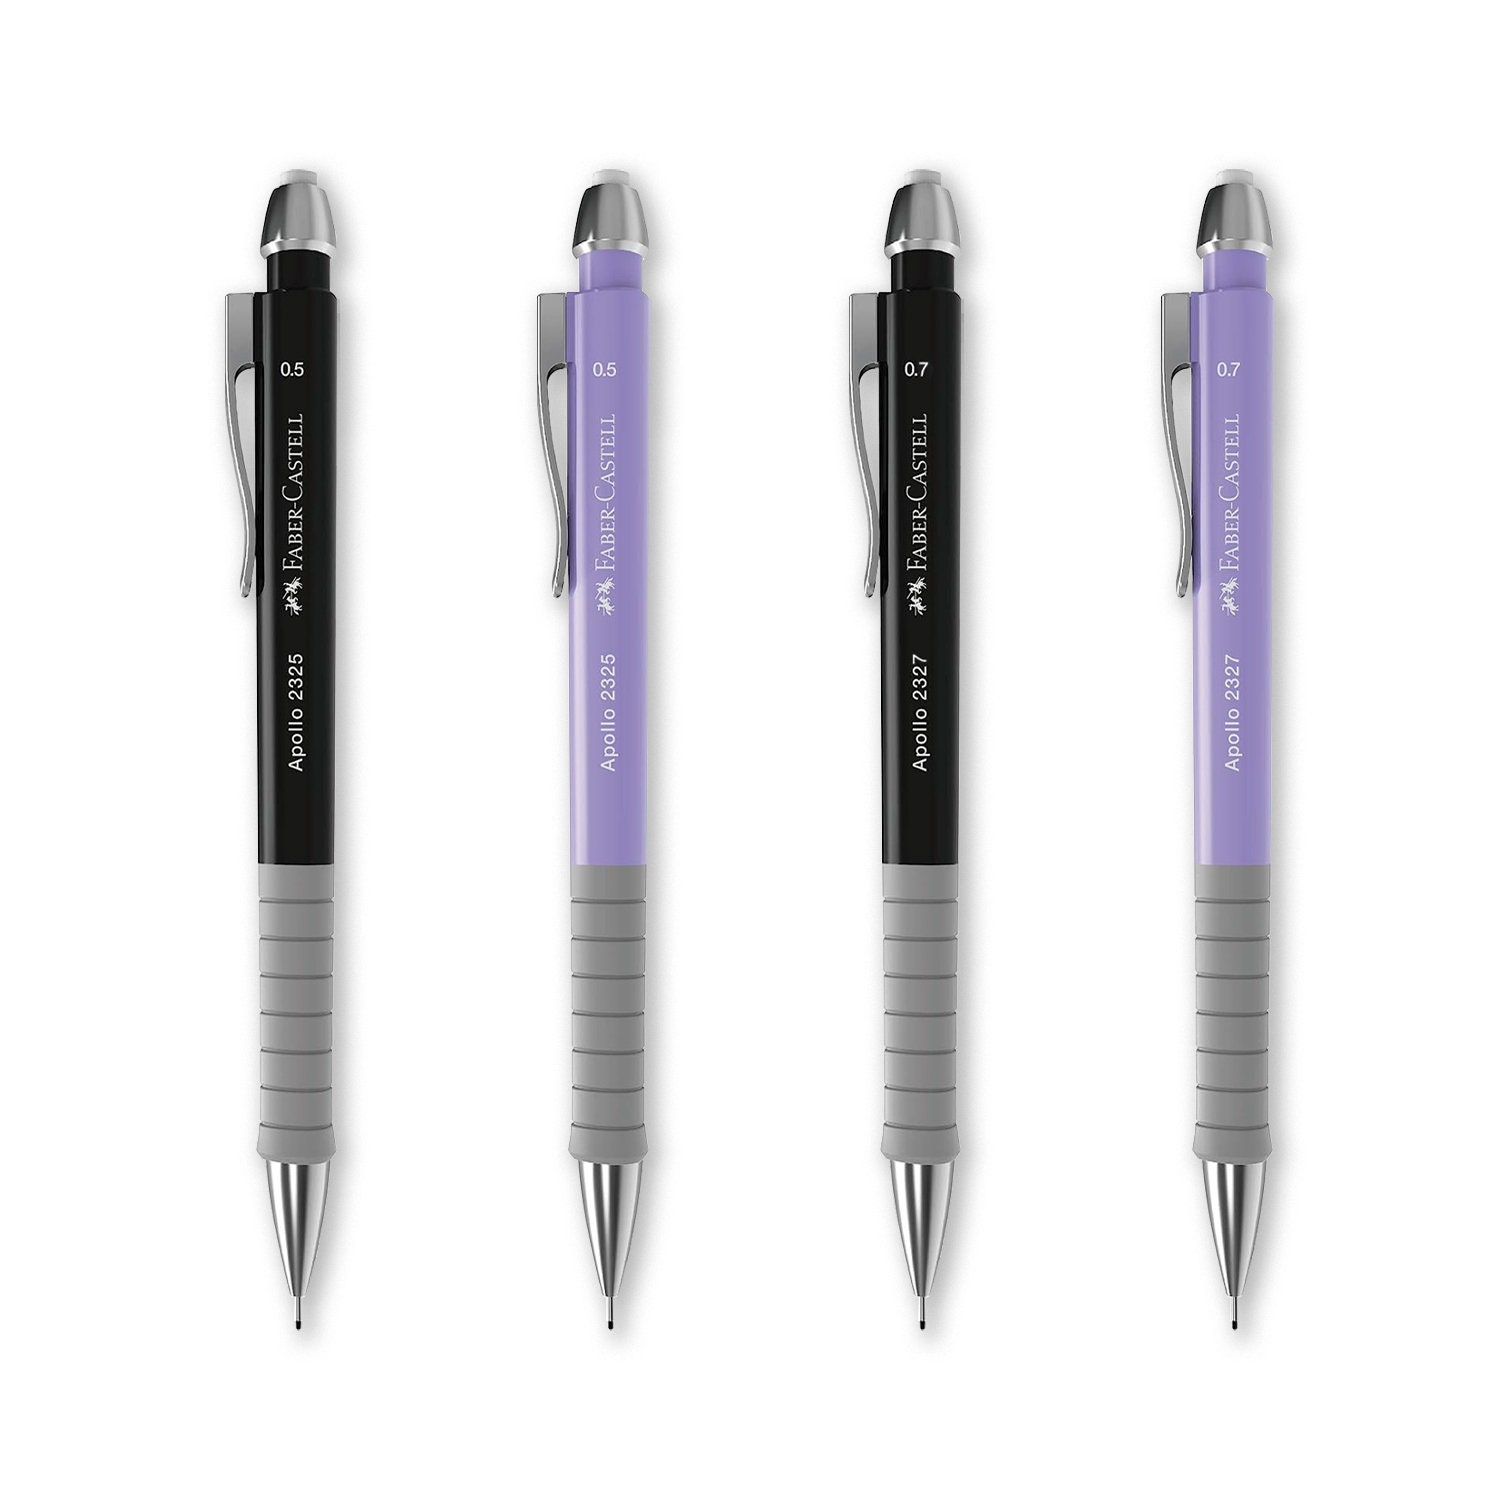 Faber-castell Apollo Mechanical Pencil 0.5mm or 0.7mm Lead Tip Grade B  Black or Lilac Stationery Drawing Sketching Graphite Artist 